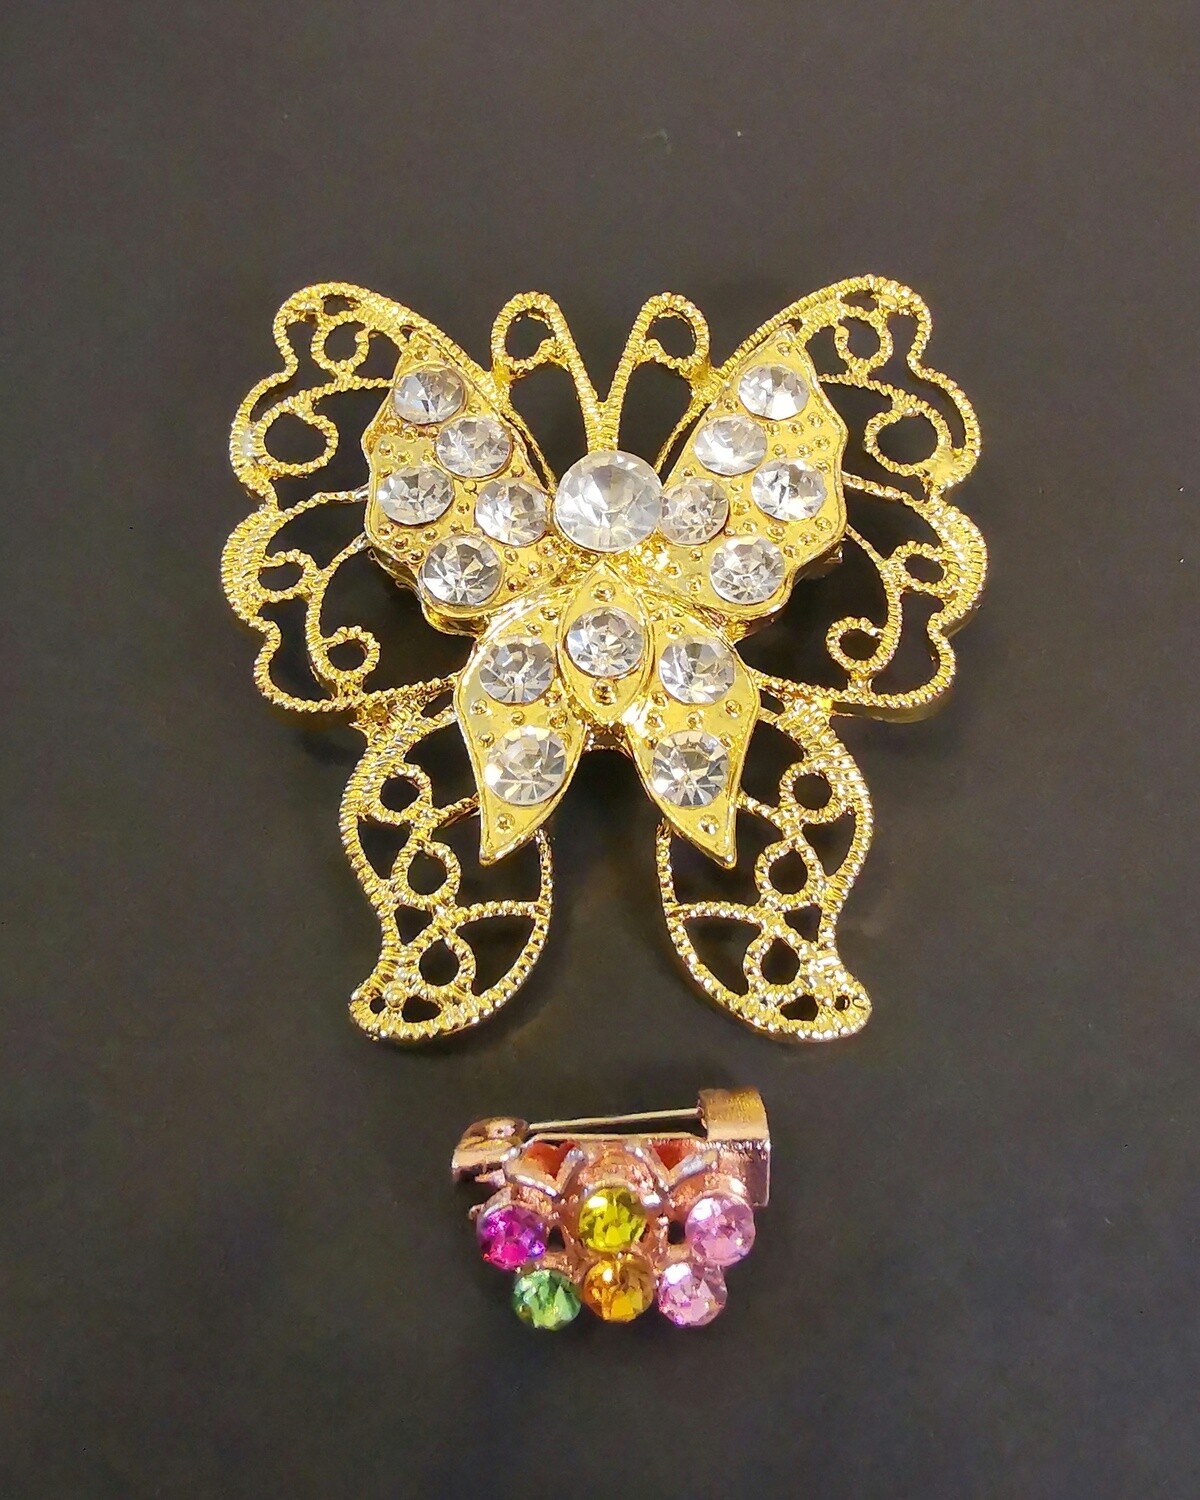 Pathfinder Golden Butterfly Brooch and Pin